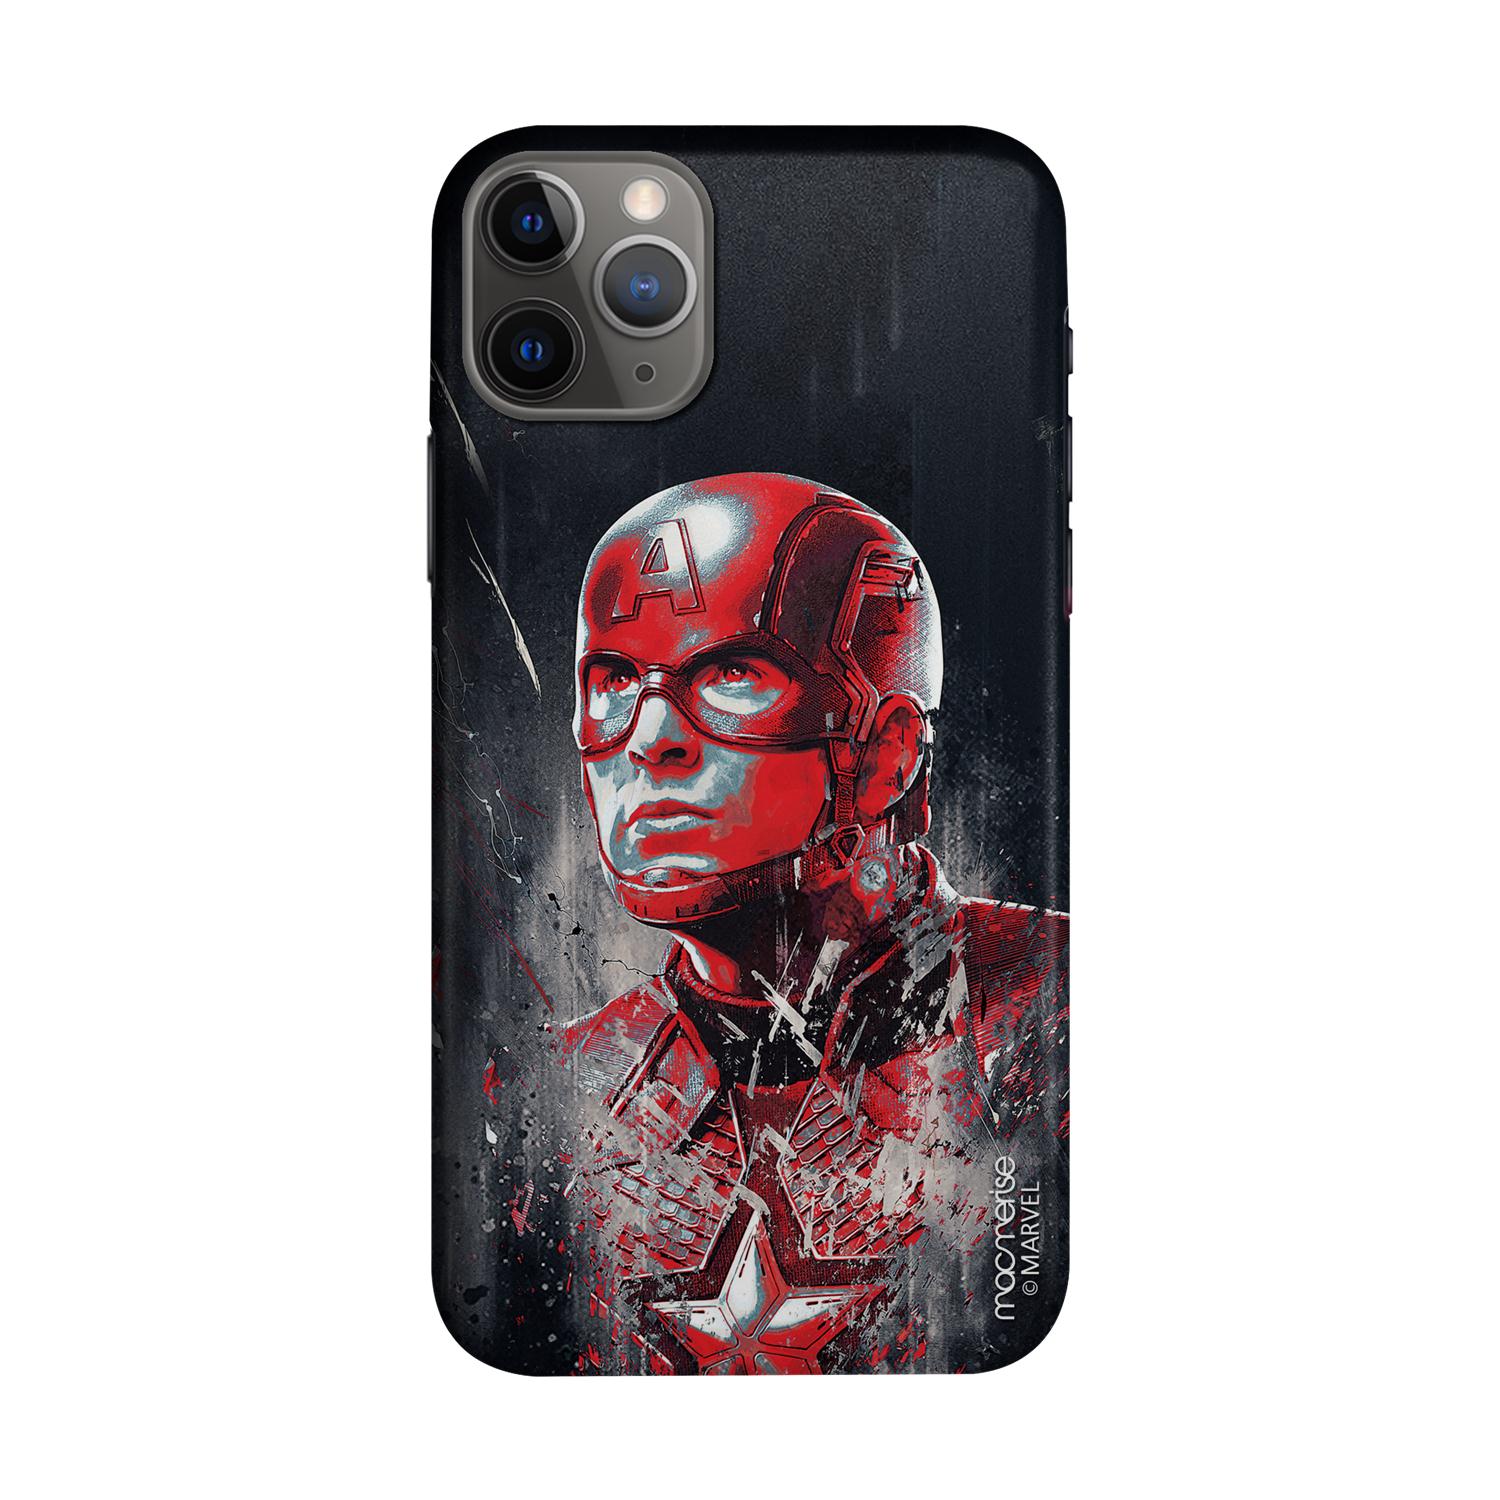 Buy Charcoal Art Captain America - Sleek Phone Case for iPhone 11 Pro Max Online